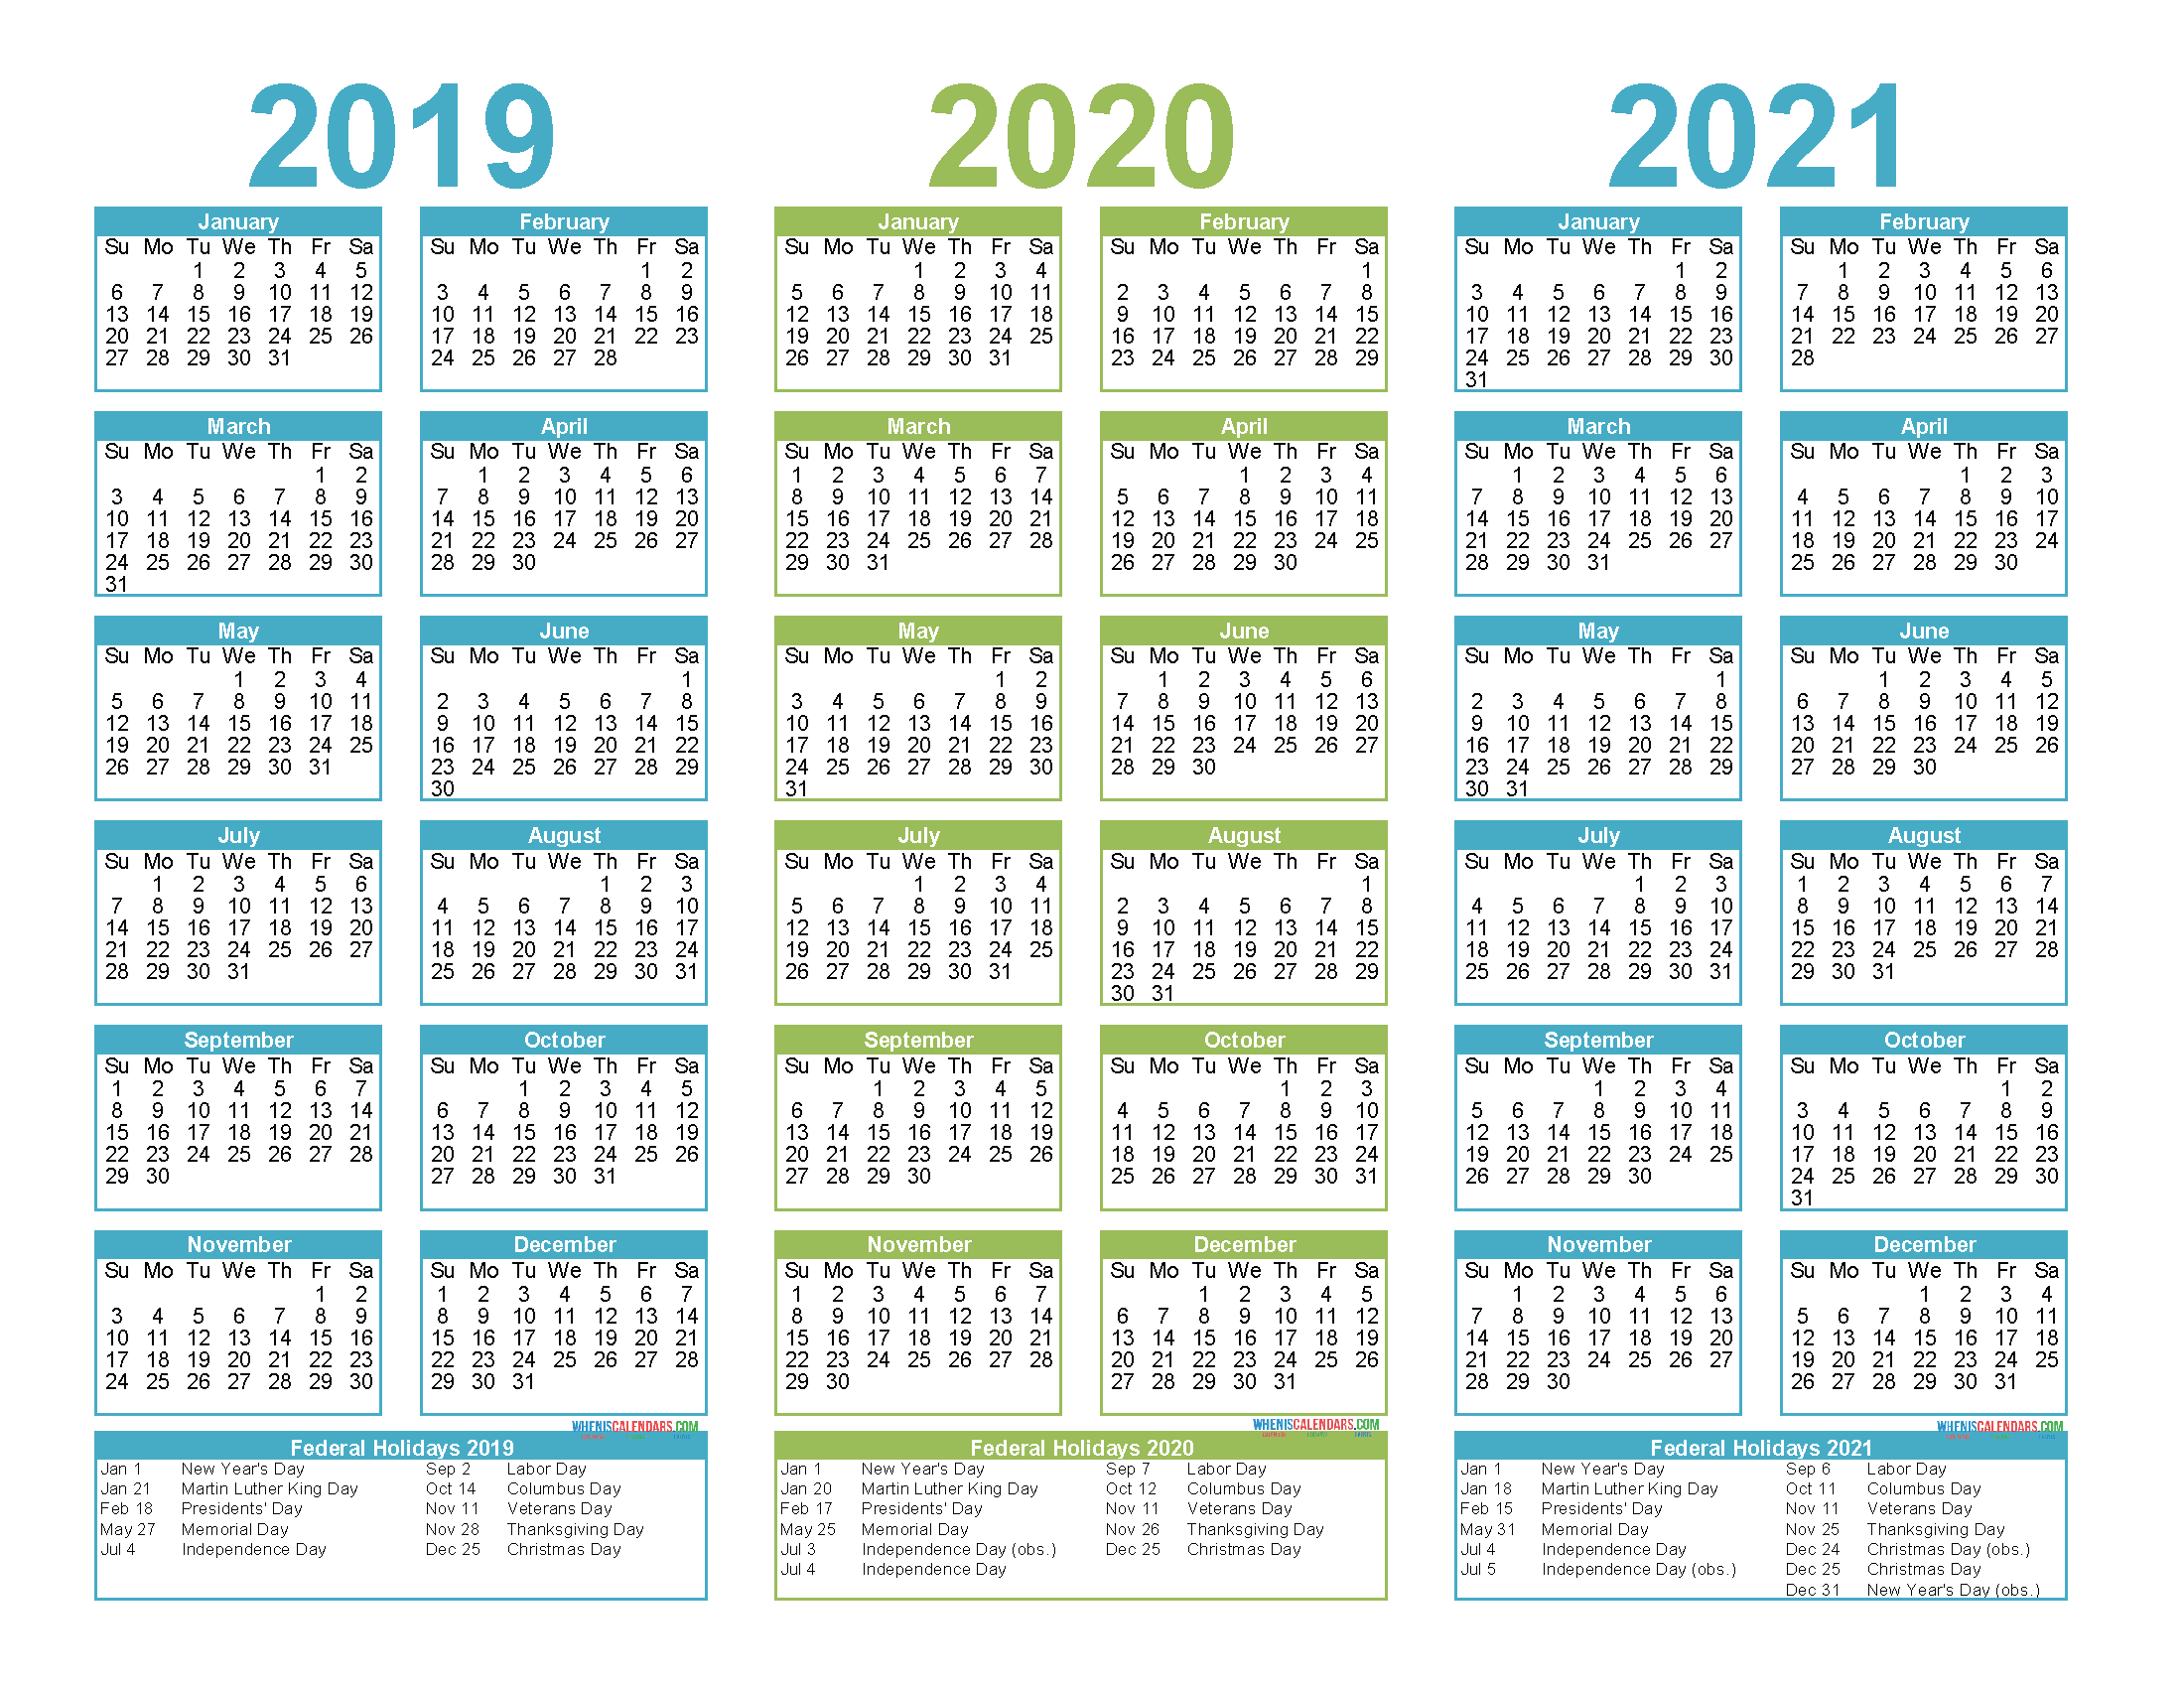 Free Printable 2019 2020 2021 Calendar with Holidays - Free Printable 2020 Monthly Calendar with ...